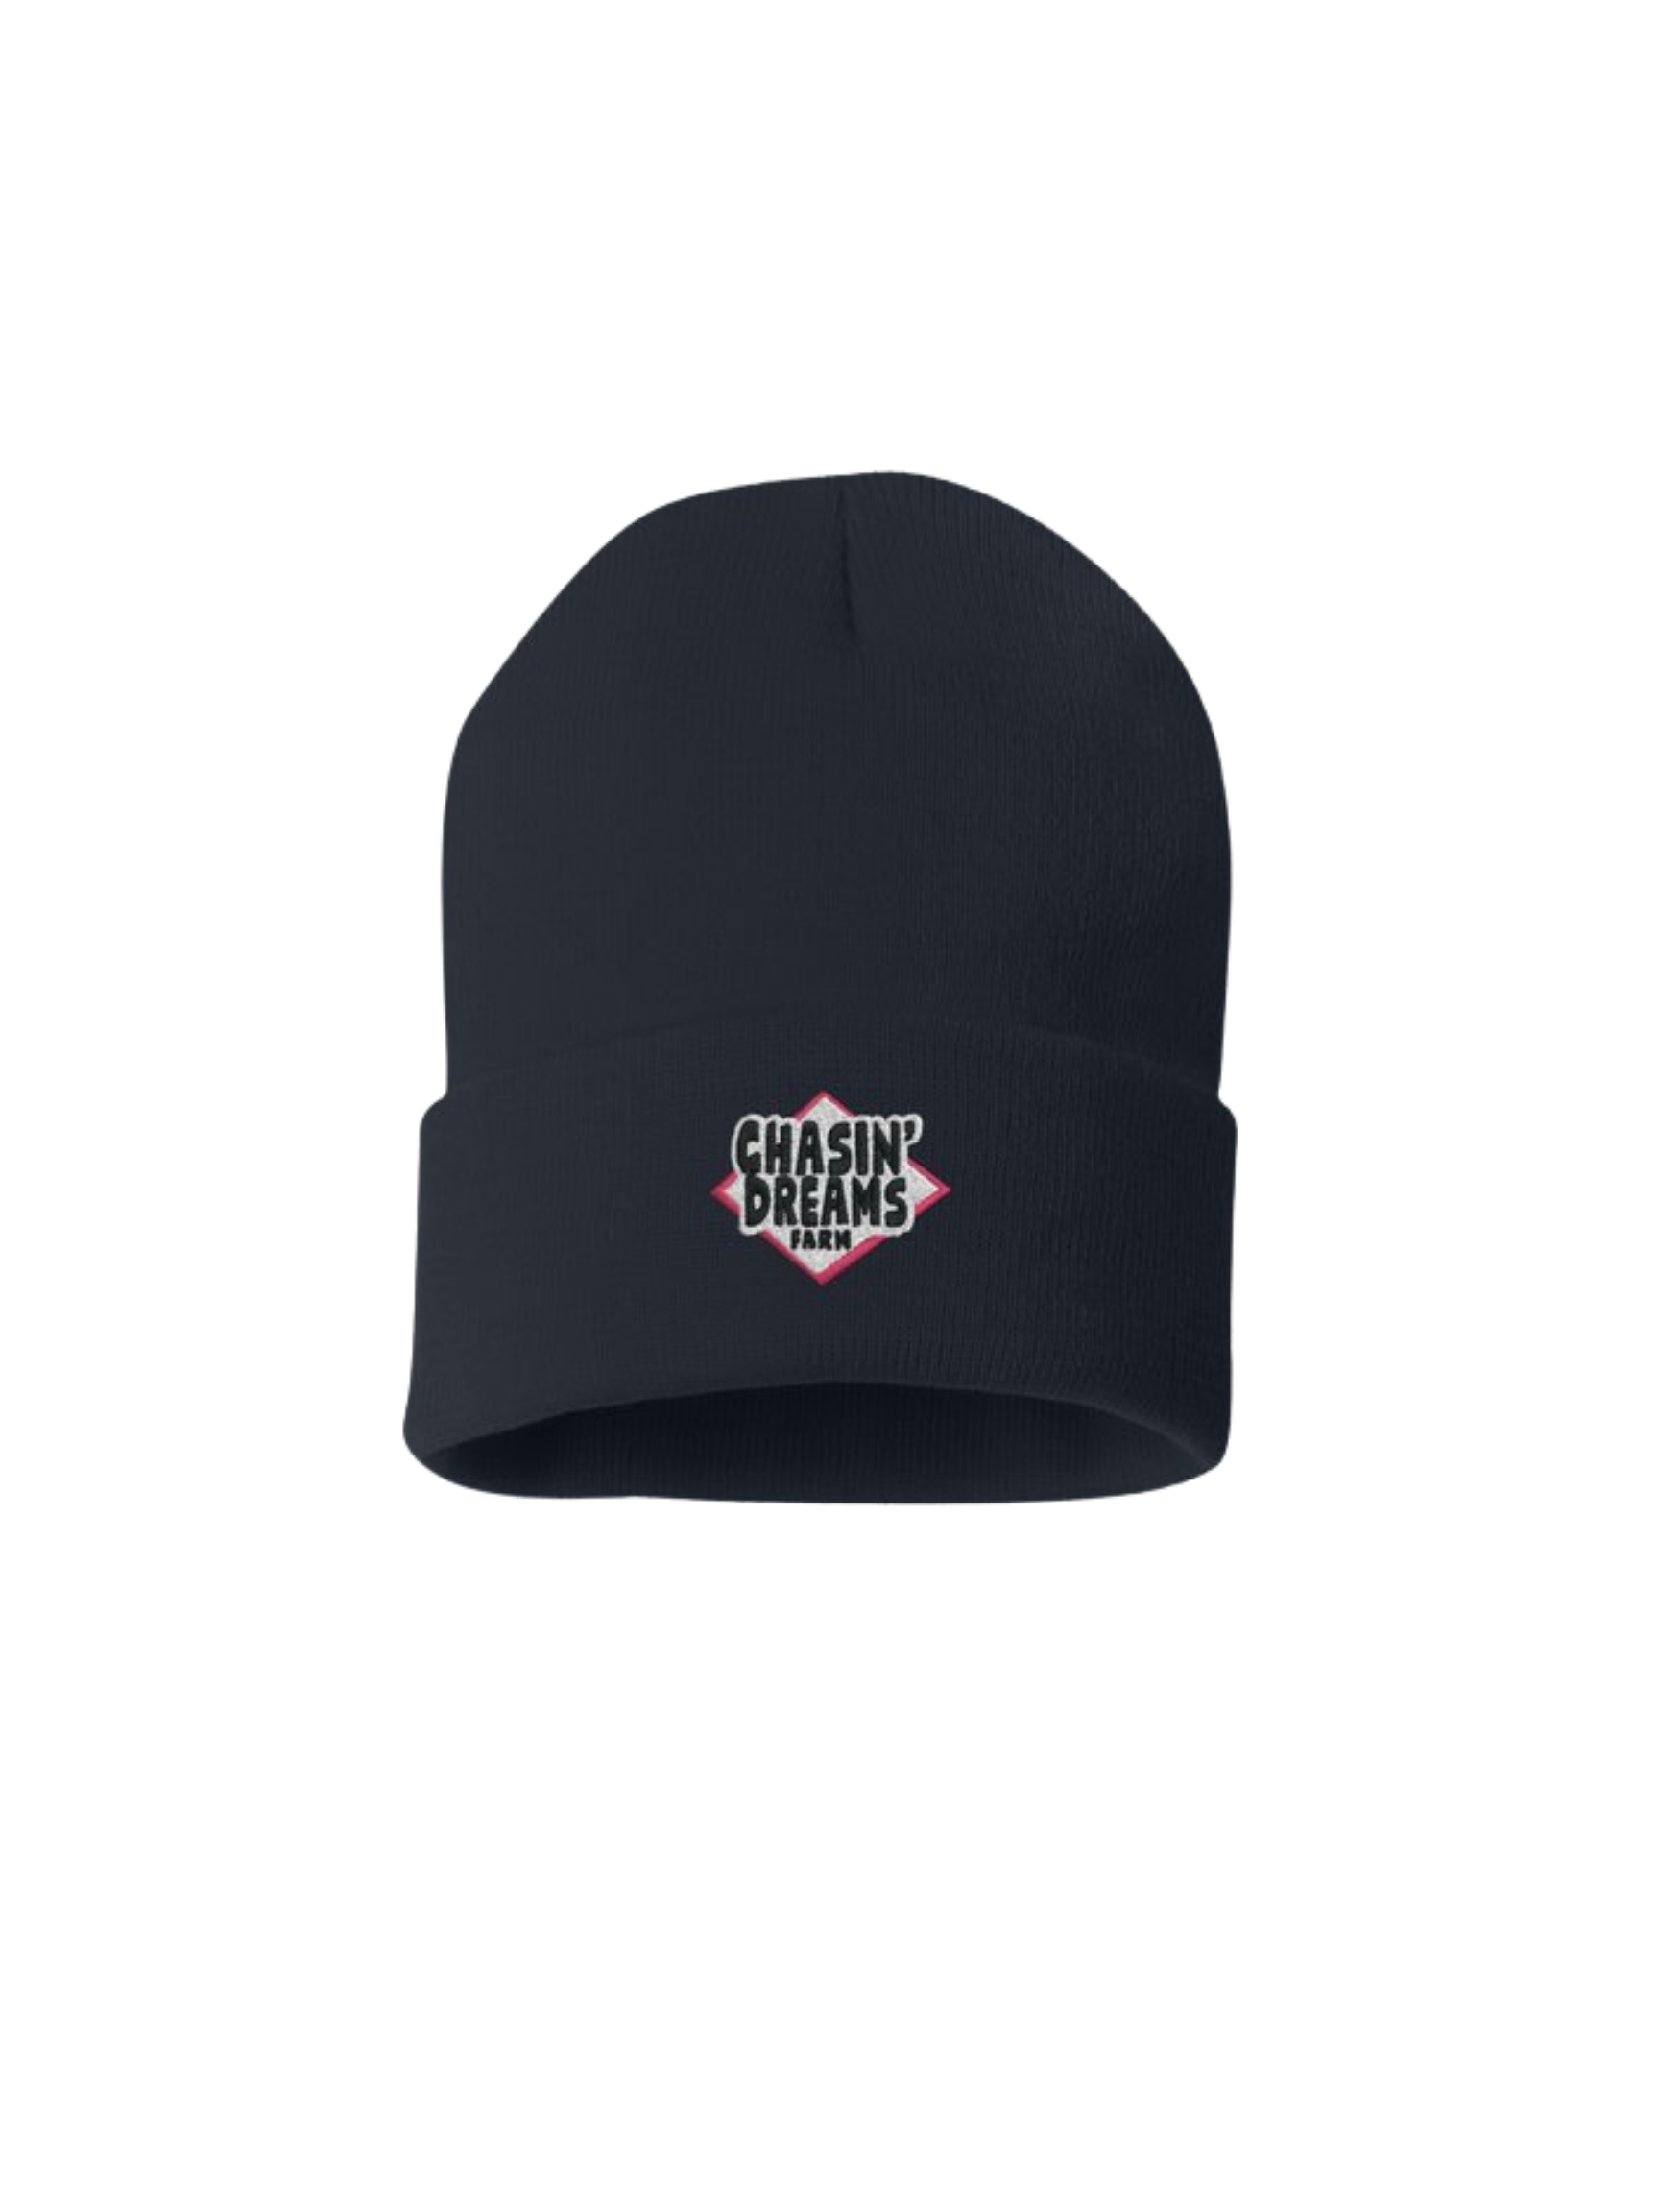 A navy beanie hat with a logo on the center reading: "Chasin' Dreams Farm"